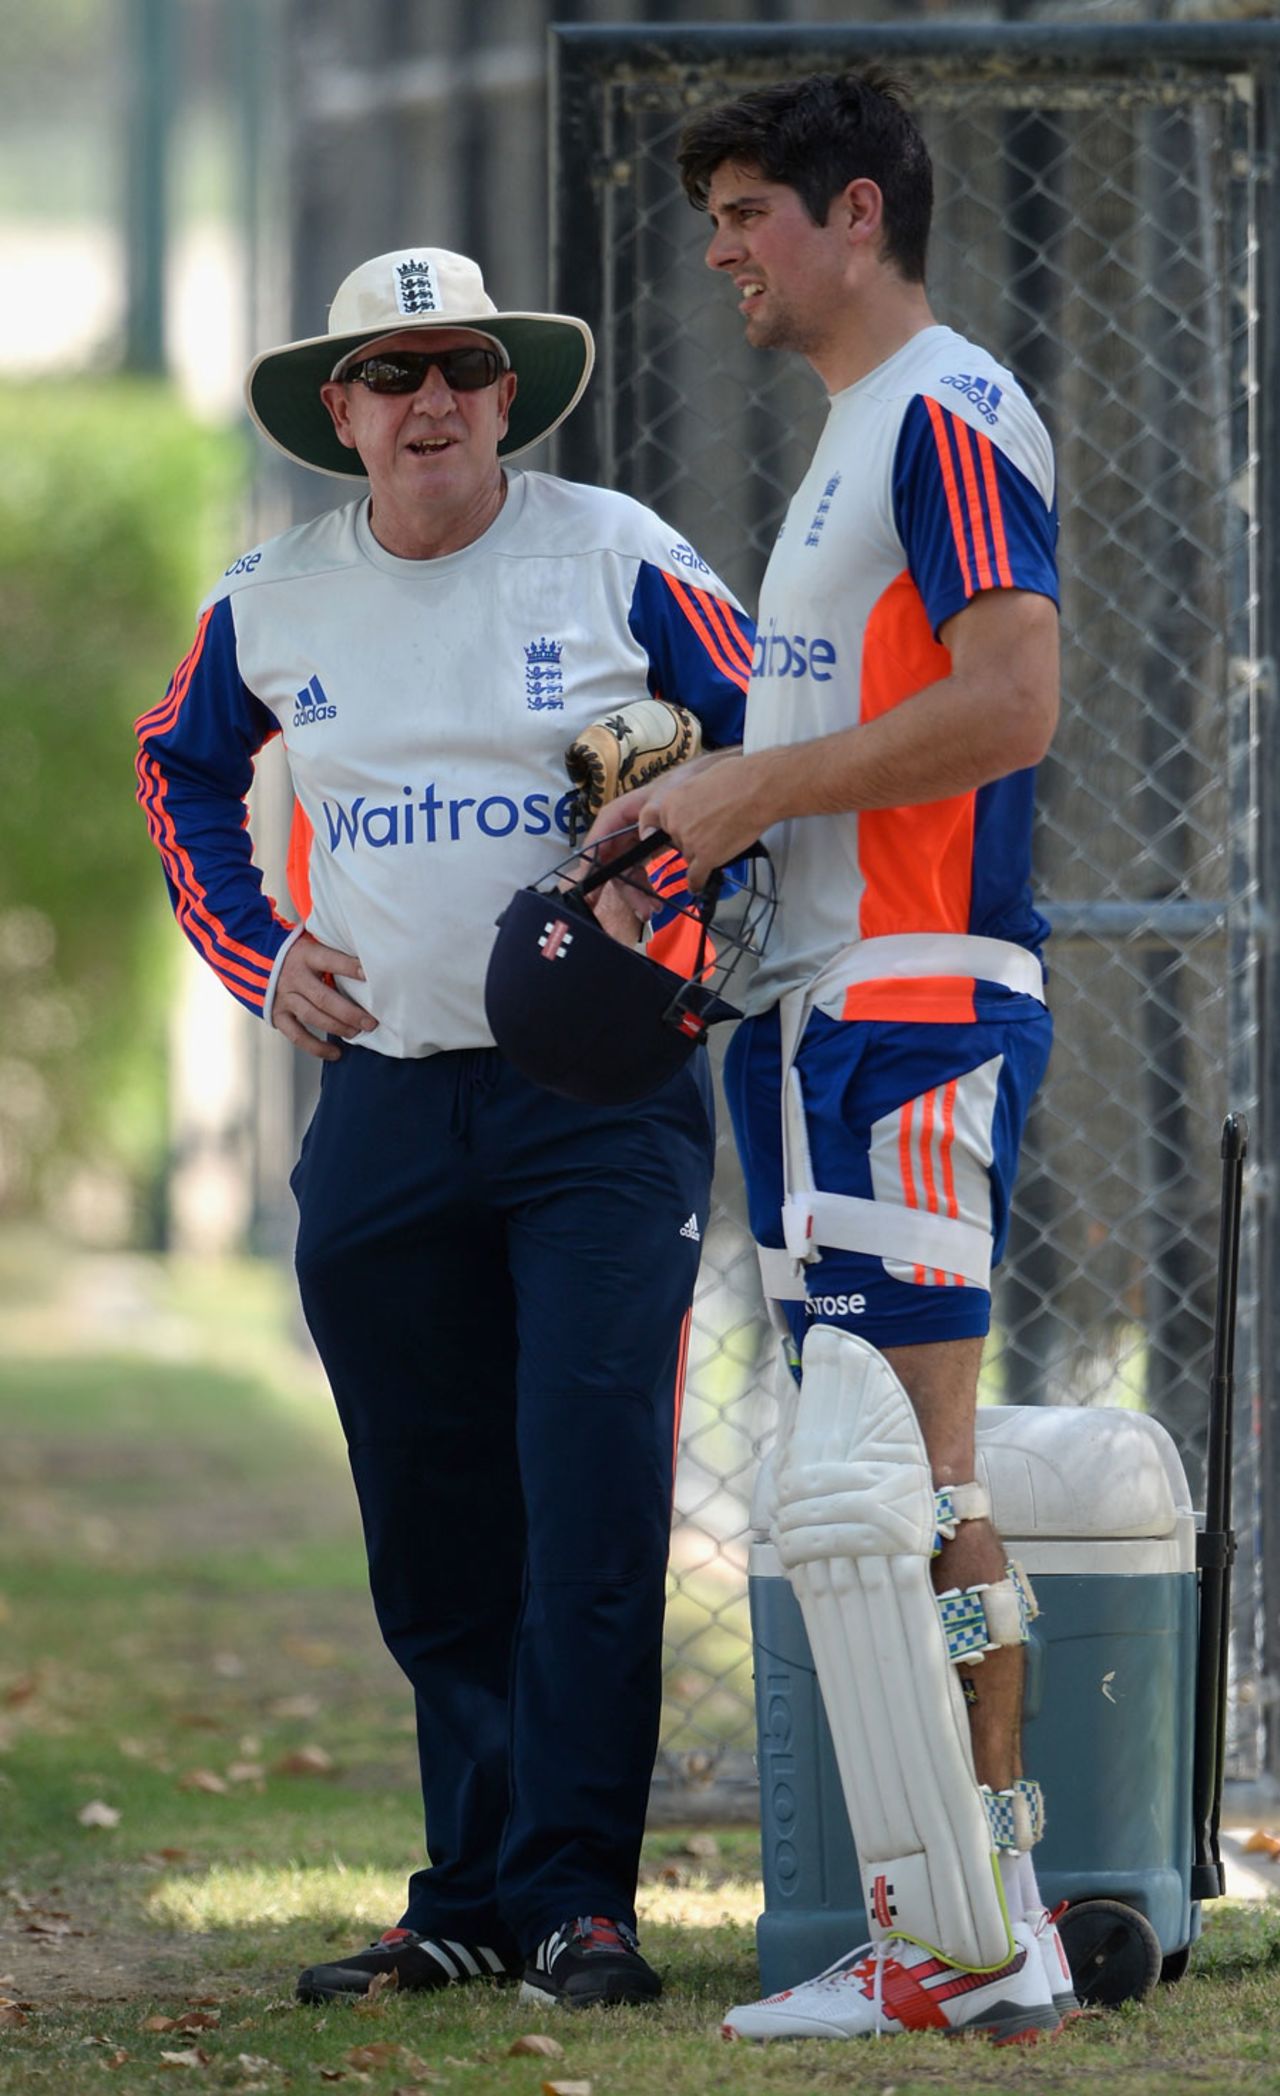 Trevor Bayliss and Alastair Cook have a chat in the shade, Dubai, October 3, 2015